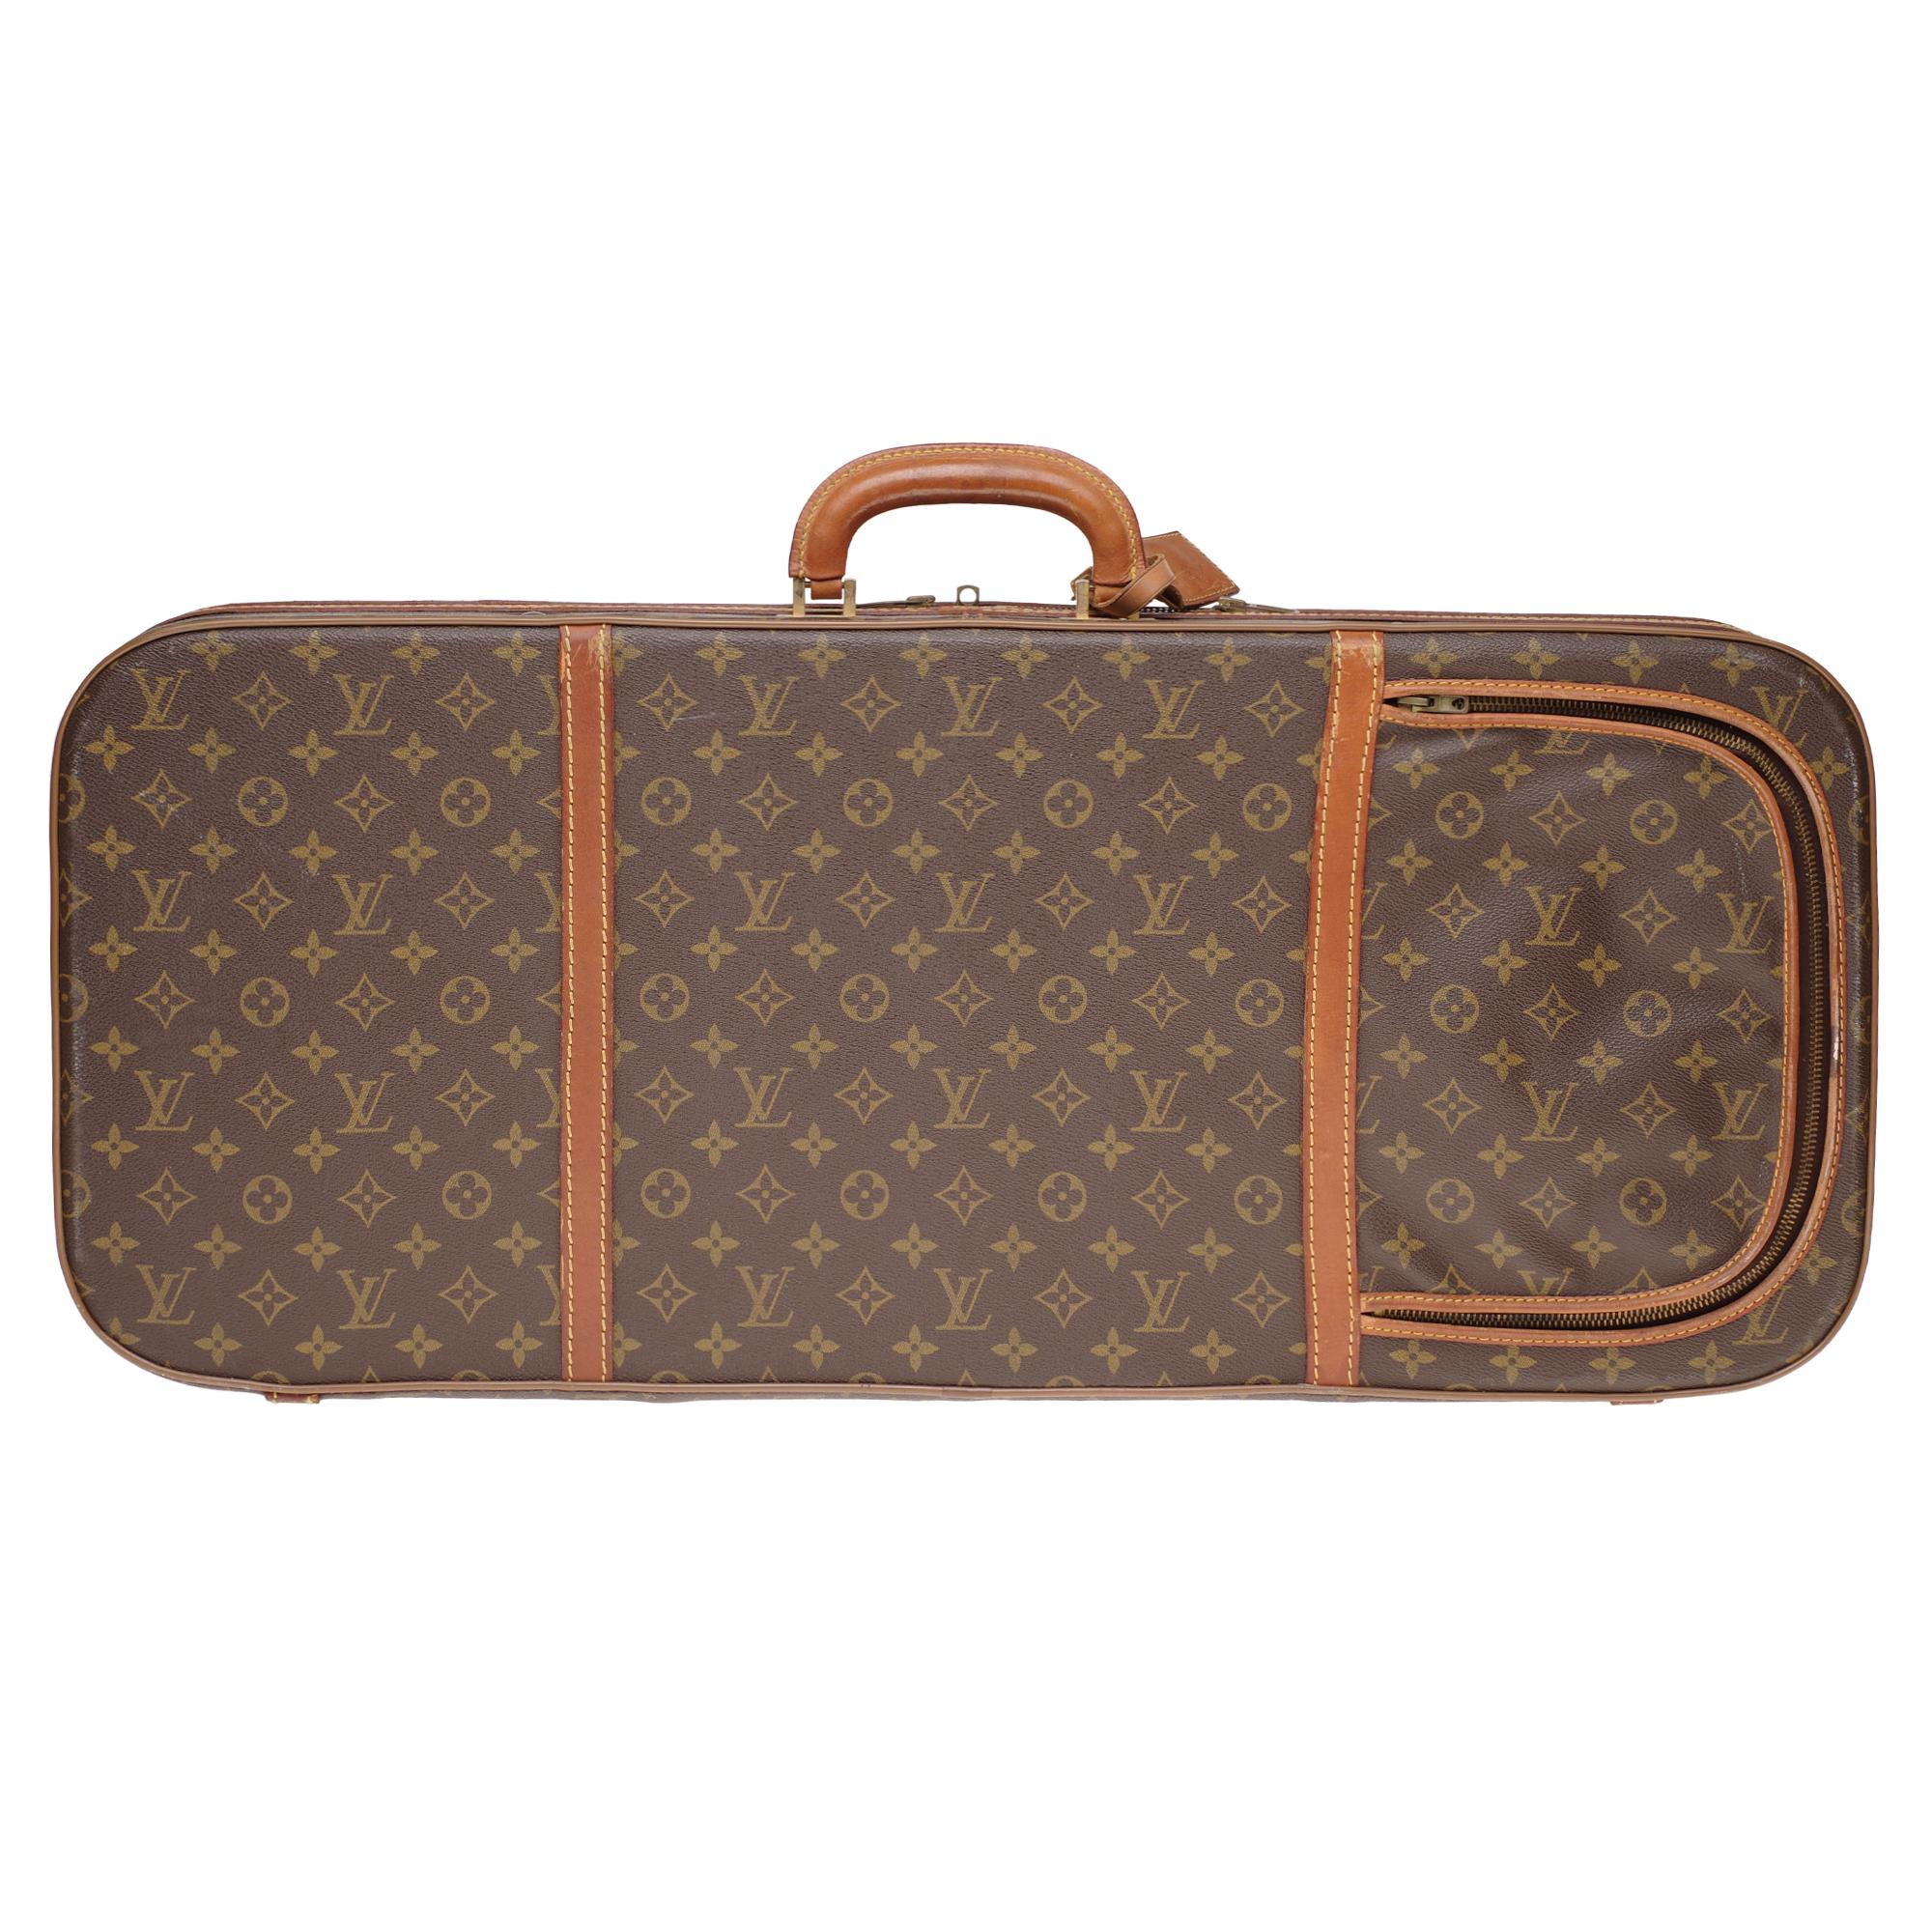 BEAUTIFUL LOUIS VUITTON COLLECTOR’S PIECE.

Tennis case in rigid monogram canvas.
Beige canvas interior
Natural leather handle.
An external zippered pocket. (1 seam visible on photo).
Dimensions: 31x75x13,5cm.
Good condition vintage despite signs of